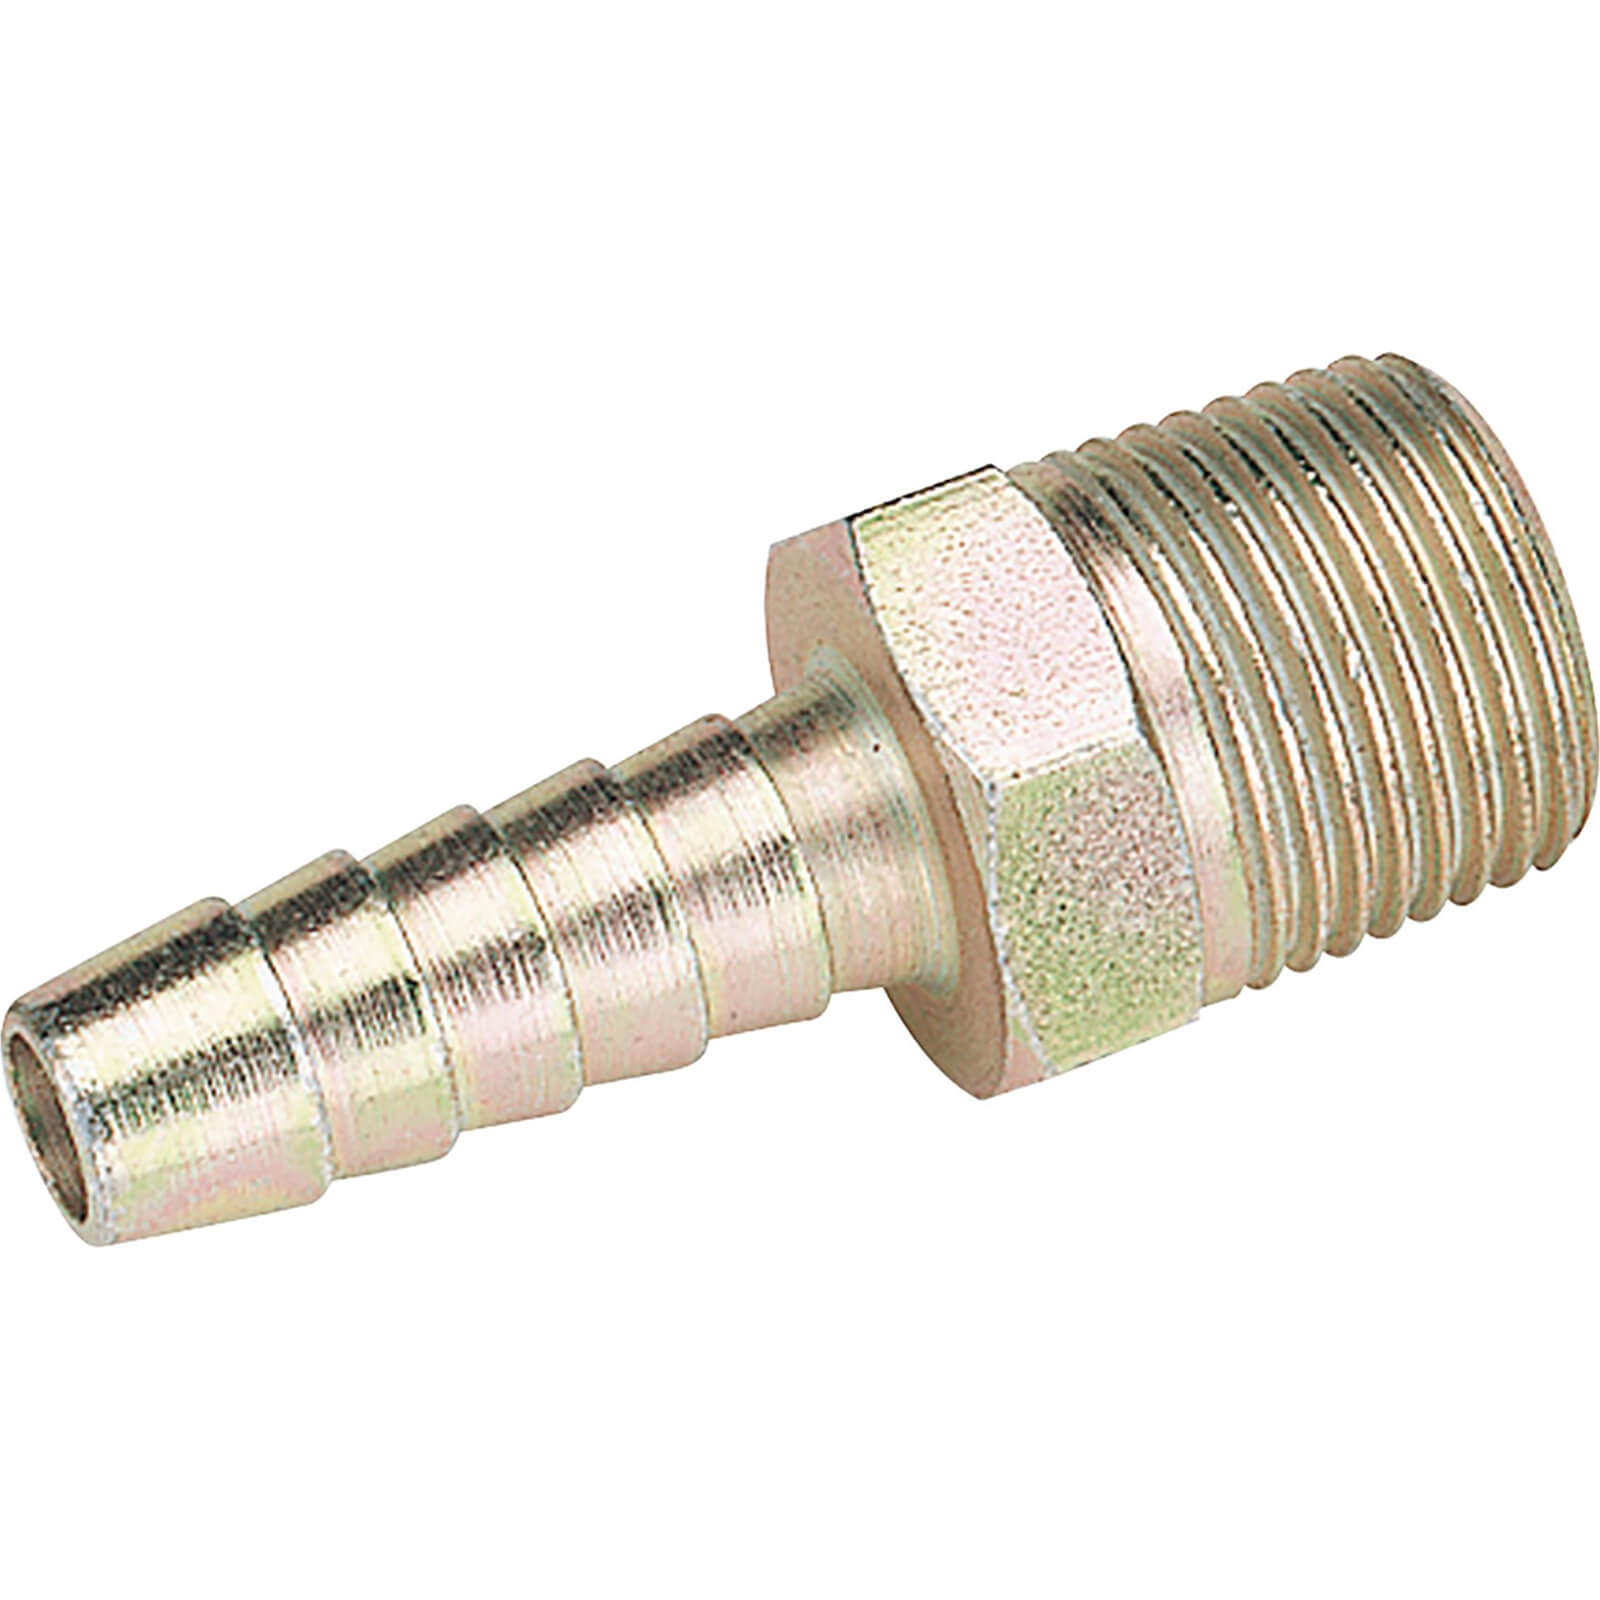 Photos - Equipment Accessory Draper PCL Tailpiece Air Line Fitting BSPT Male Thread 3/8" BSP 5/16" Pack 